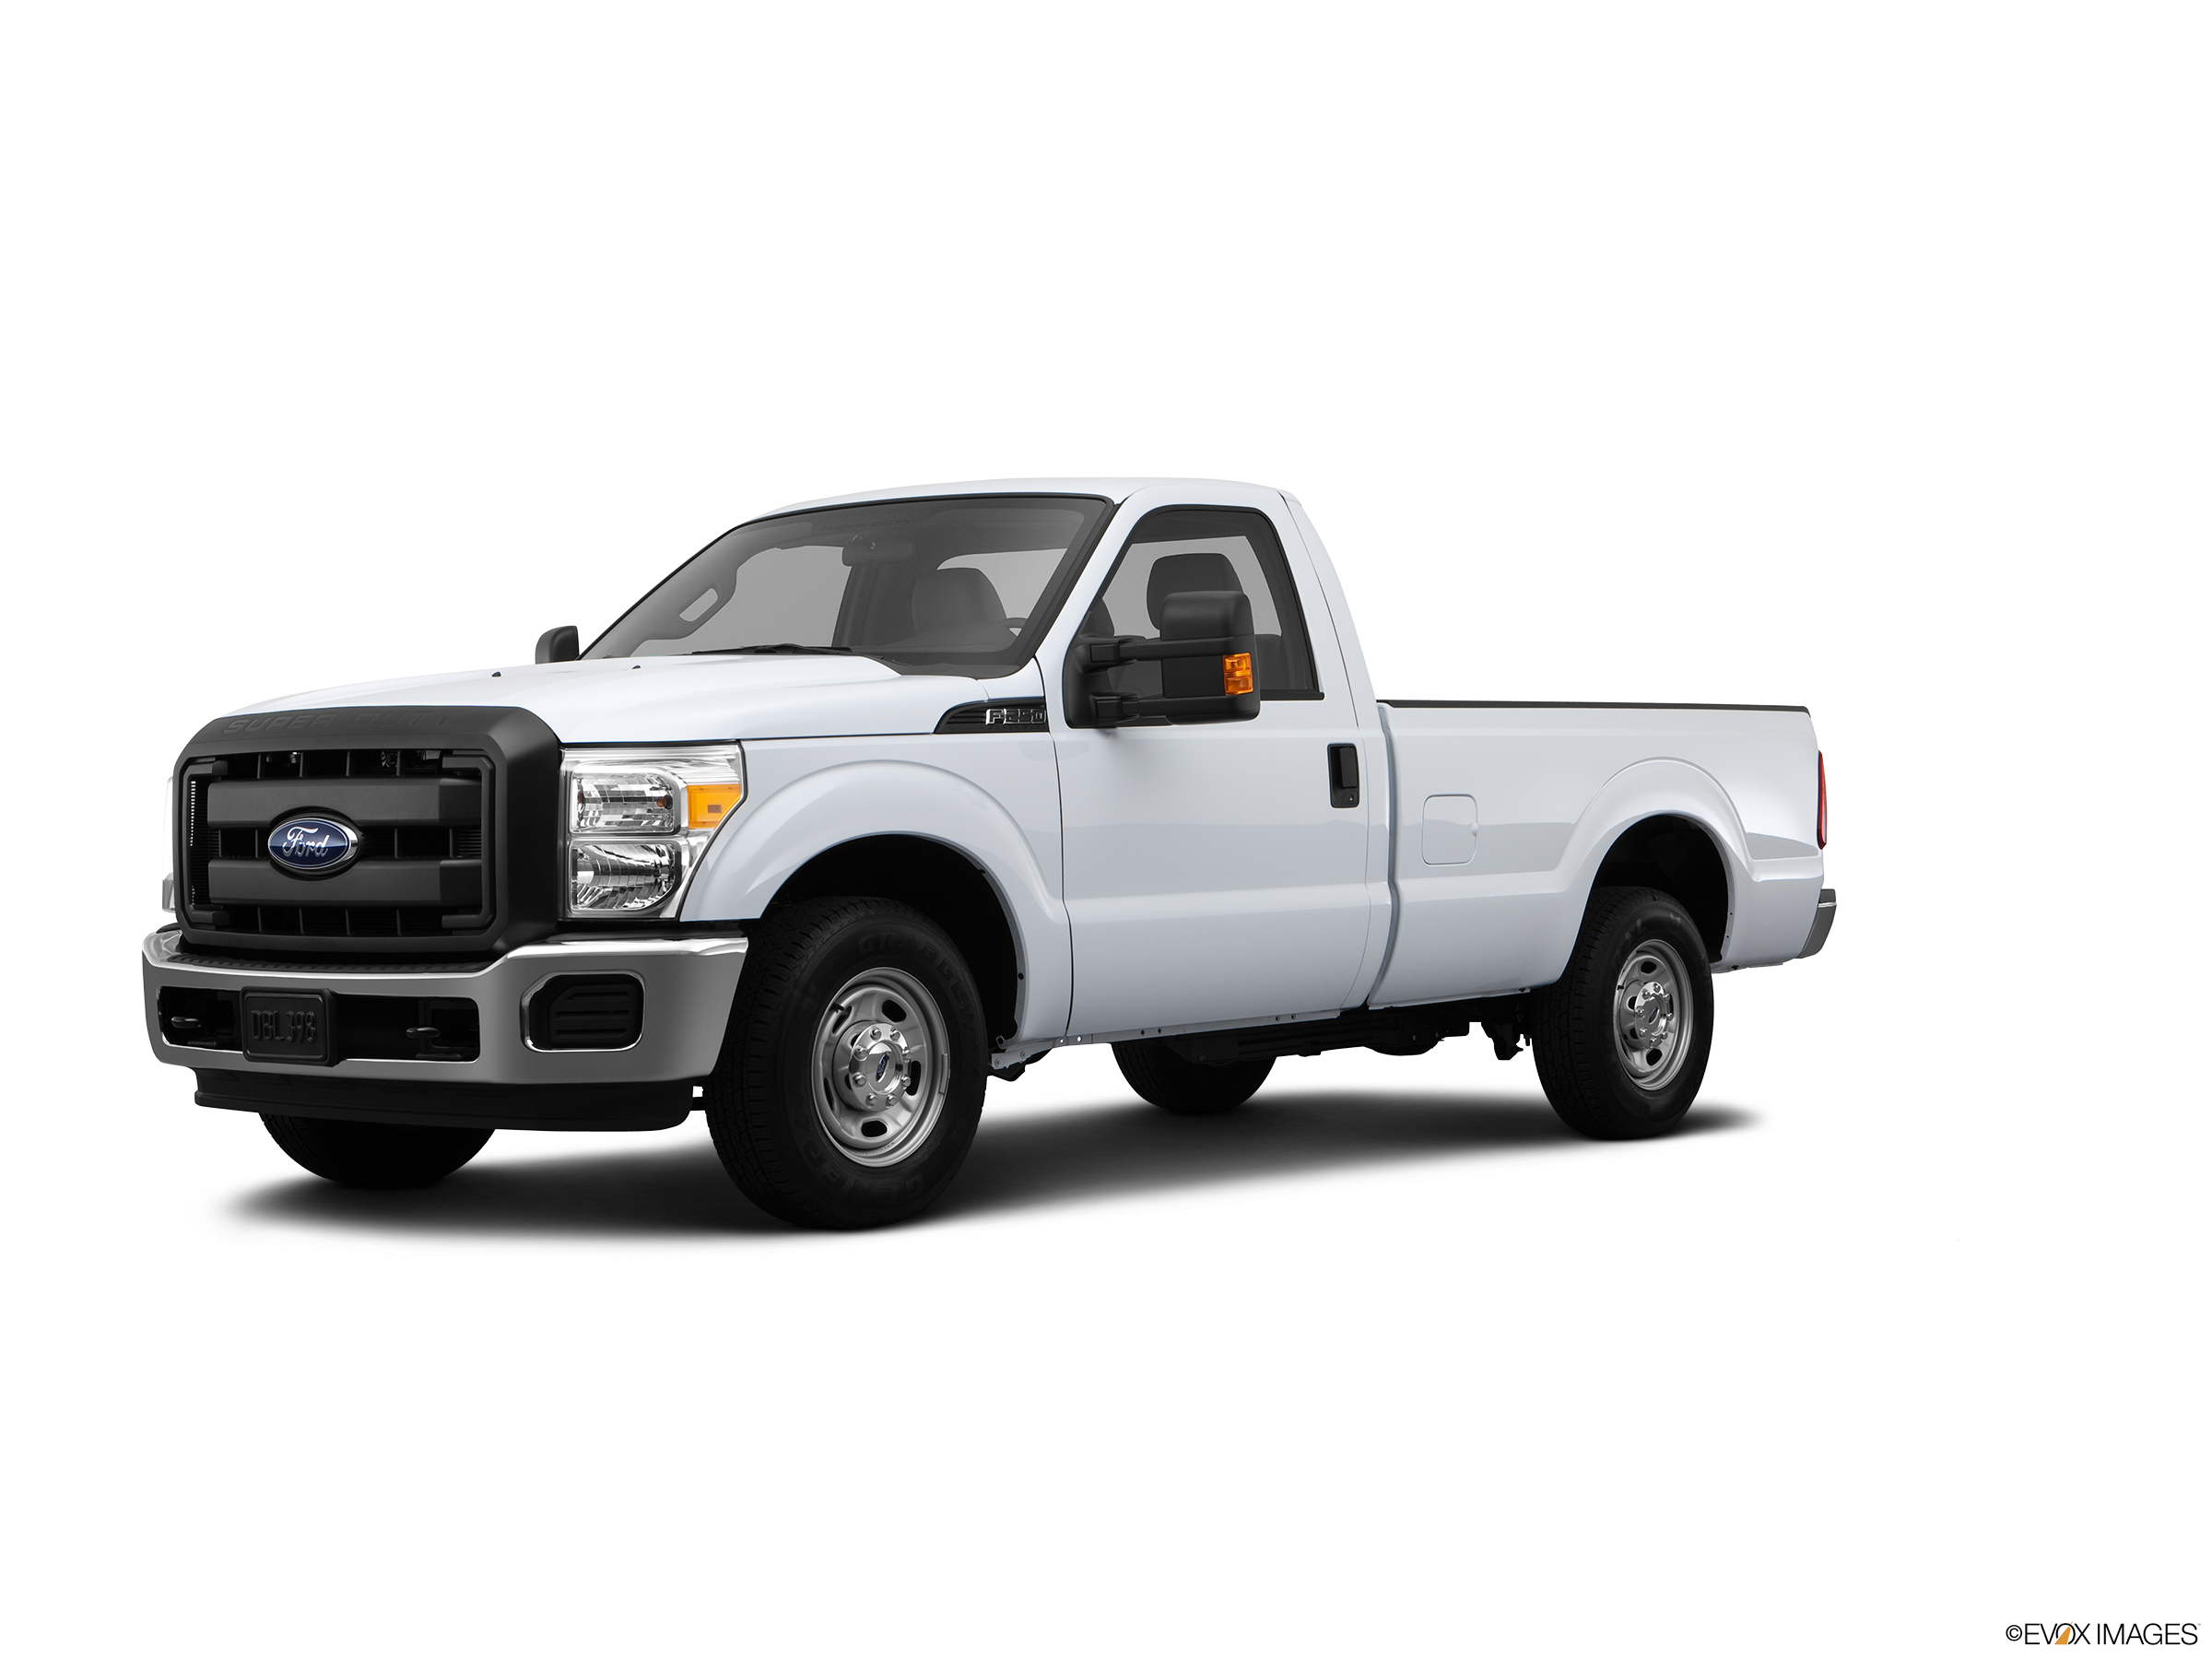 Used 2013 Ford F250 Super Duty Regular Cab Xl Pickup 2d 8 Ft Pricing